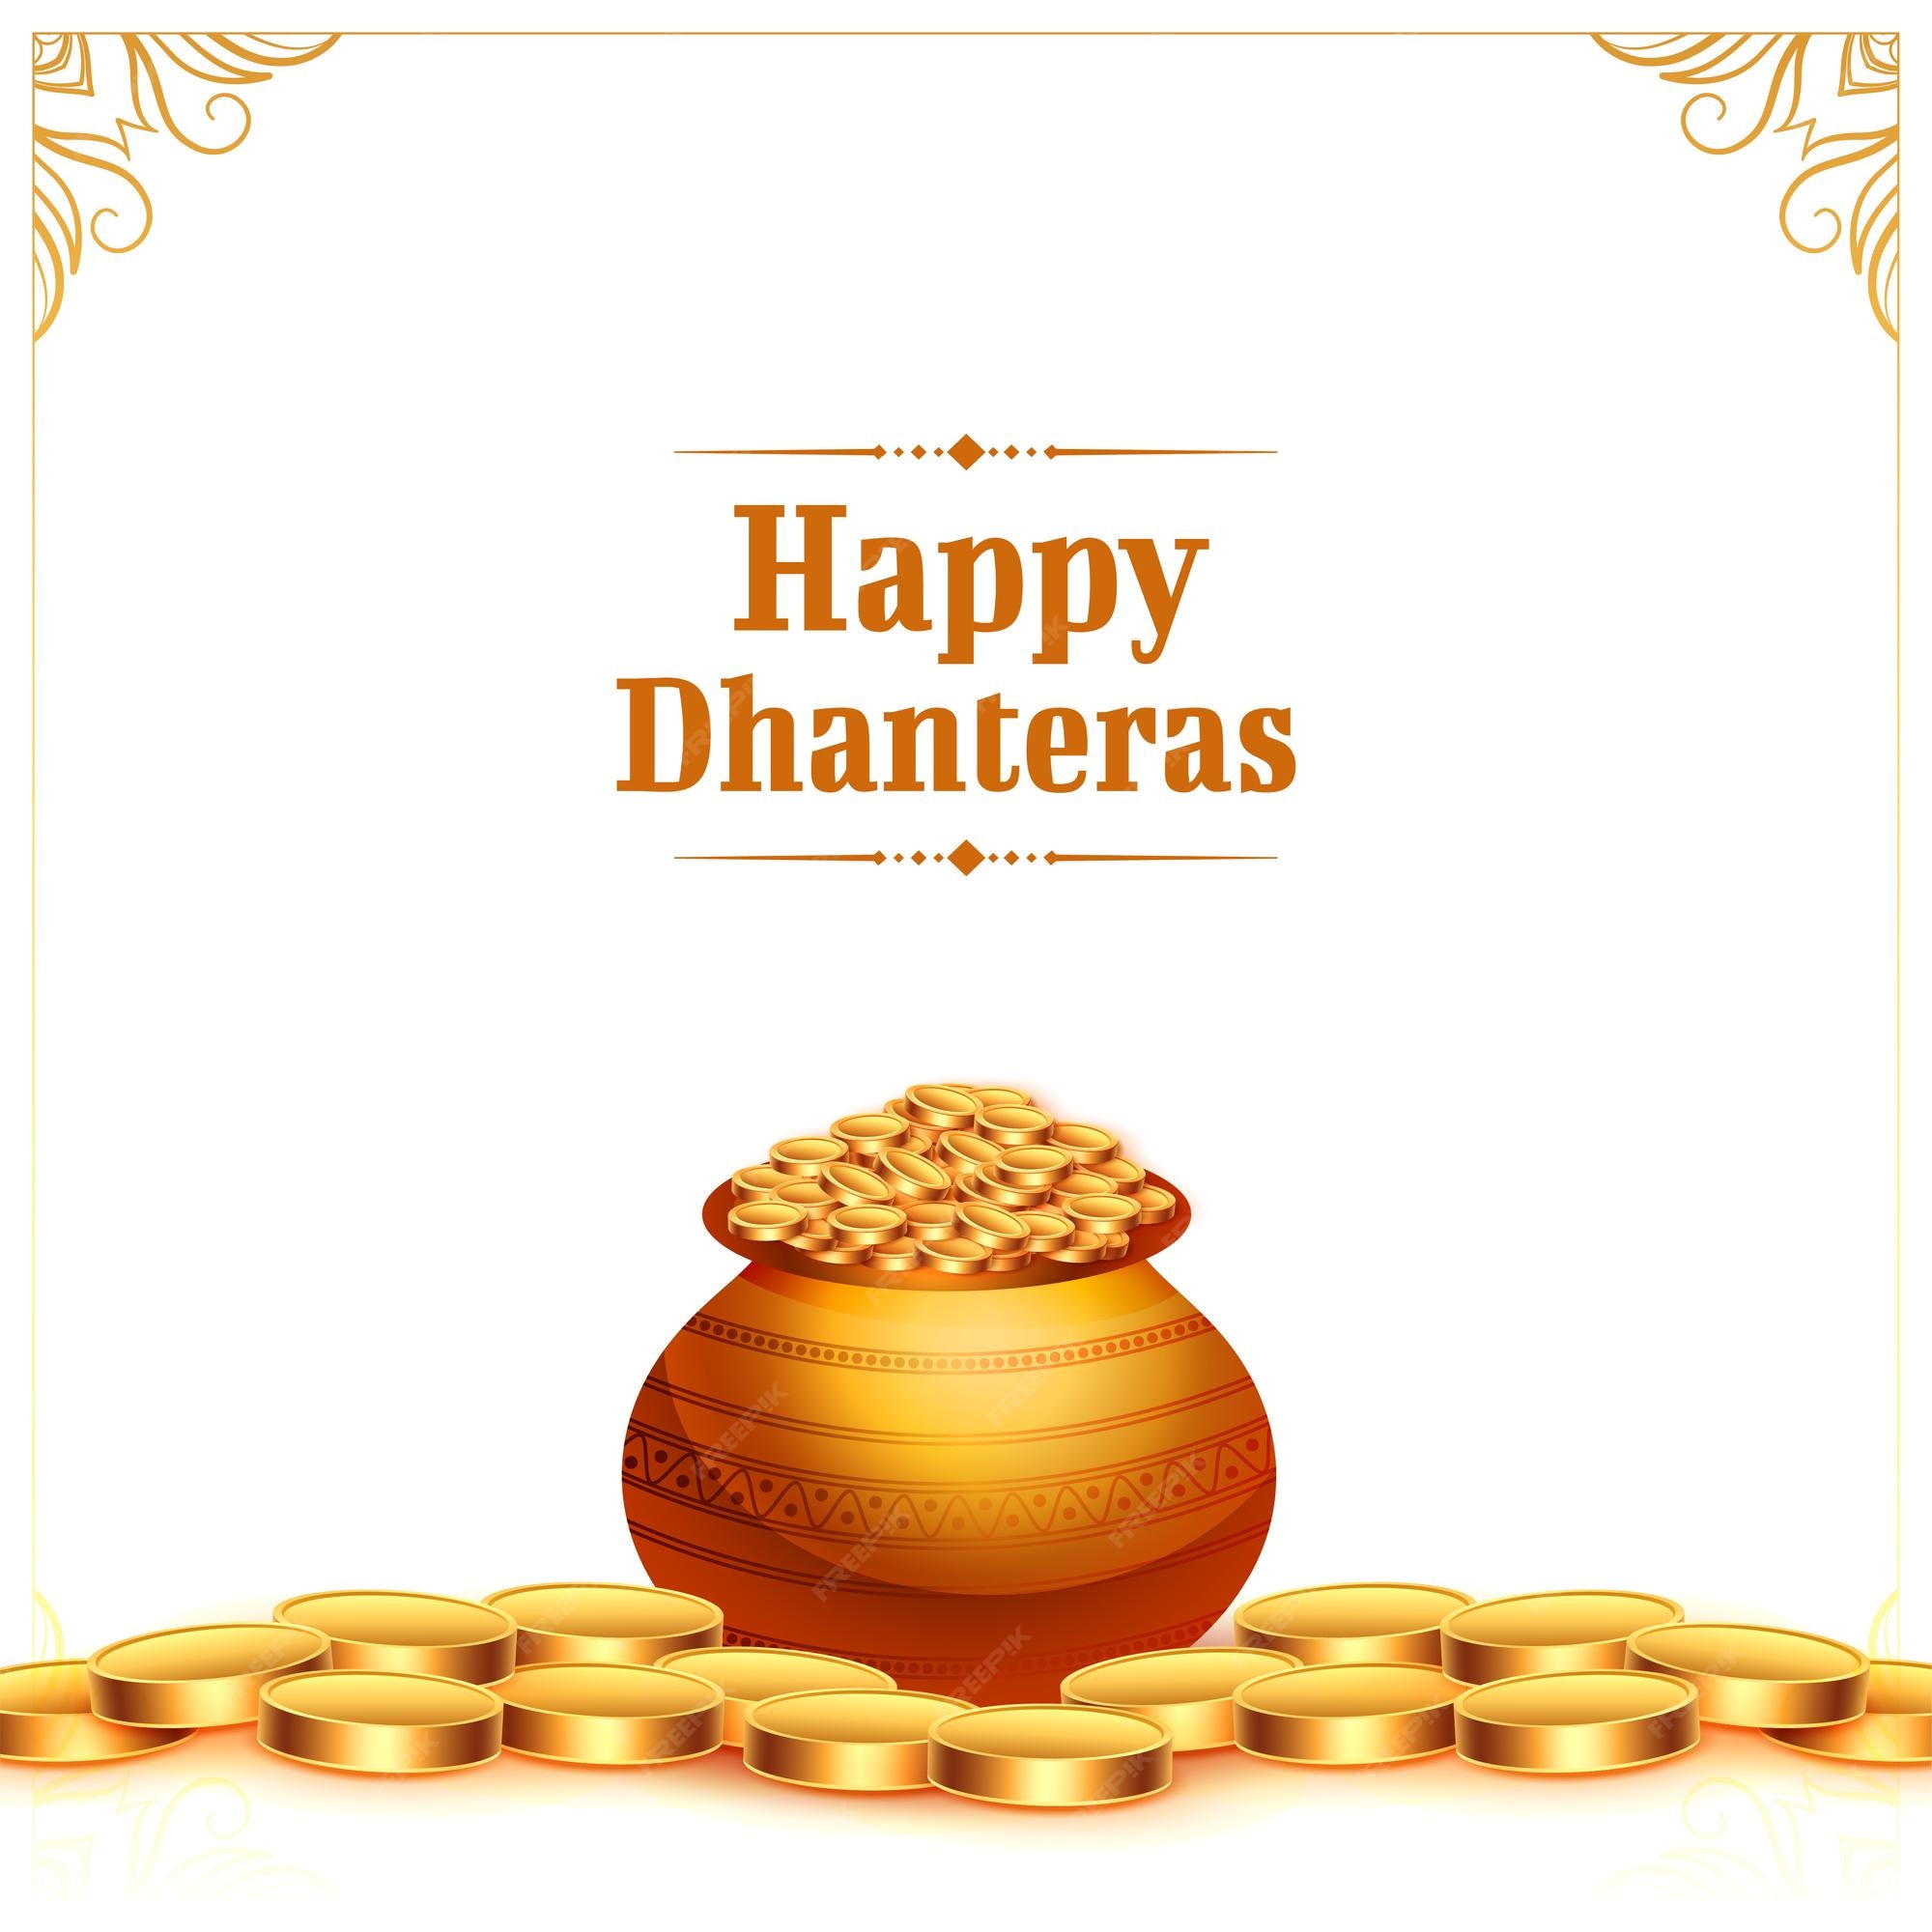 Free Vector | Happy dhanteras greeting background with golden coin design  vector